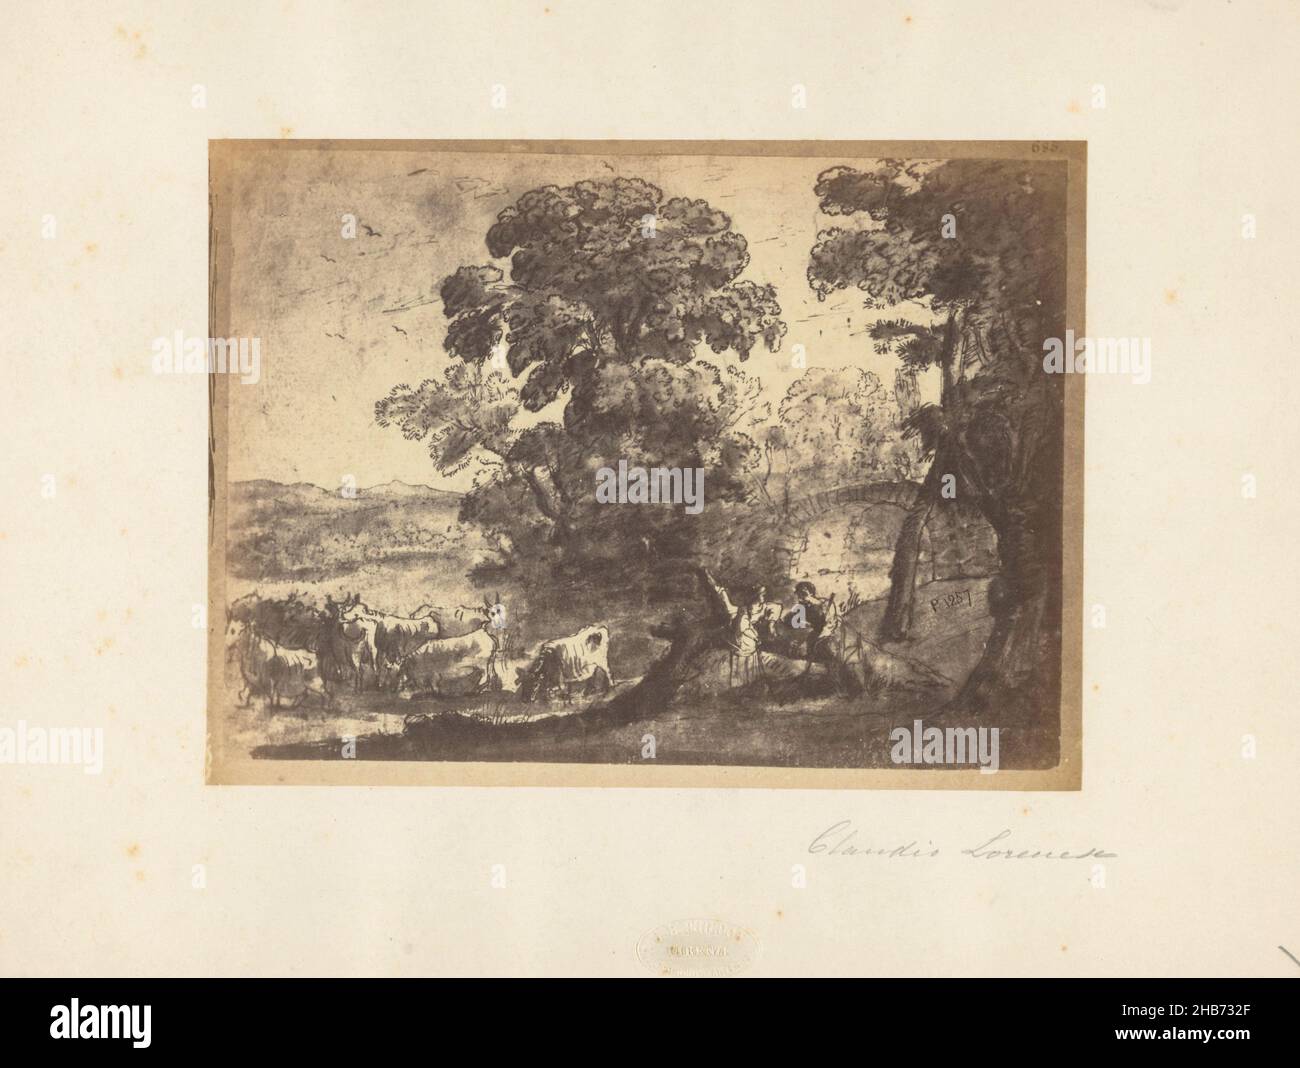 Photoreproduction of a drawing by Claude Lorrain, Giovanni Brampton Philpot (mentioned on object), intermediary draughtsman: Claude Lorrain (mentioned on object), Florence, 1851 - 1878, paper, cardboard, albumen print, height 147 mm × width 199 mmheight 241 mm × width 319 mm Stock Photo